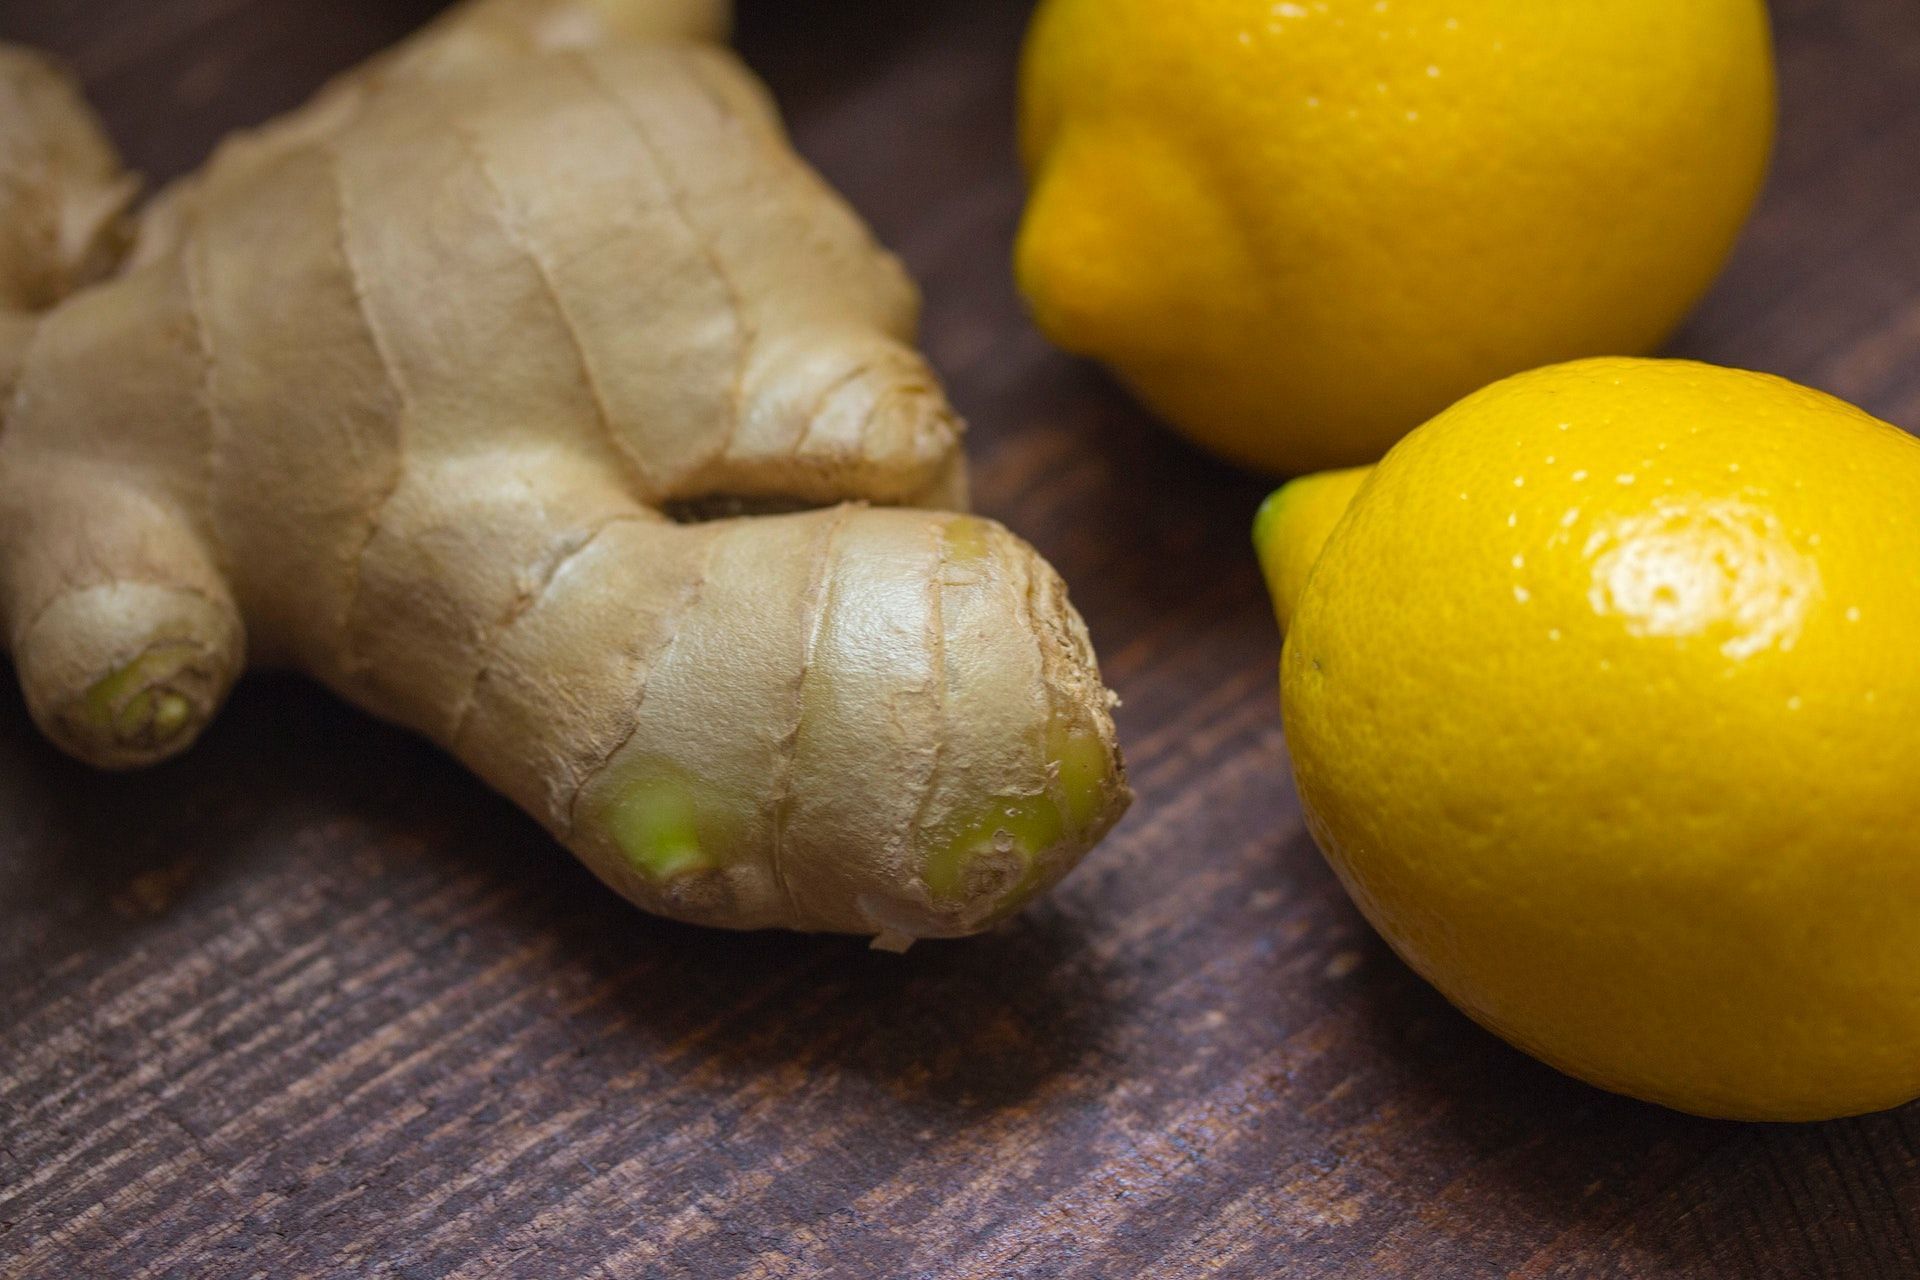 Adding ginger to diet is one of the best home remedies for bad-smelling gas. (Photo via Pexels/Angele J)